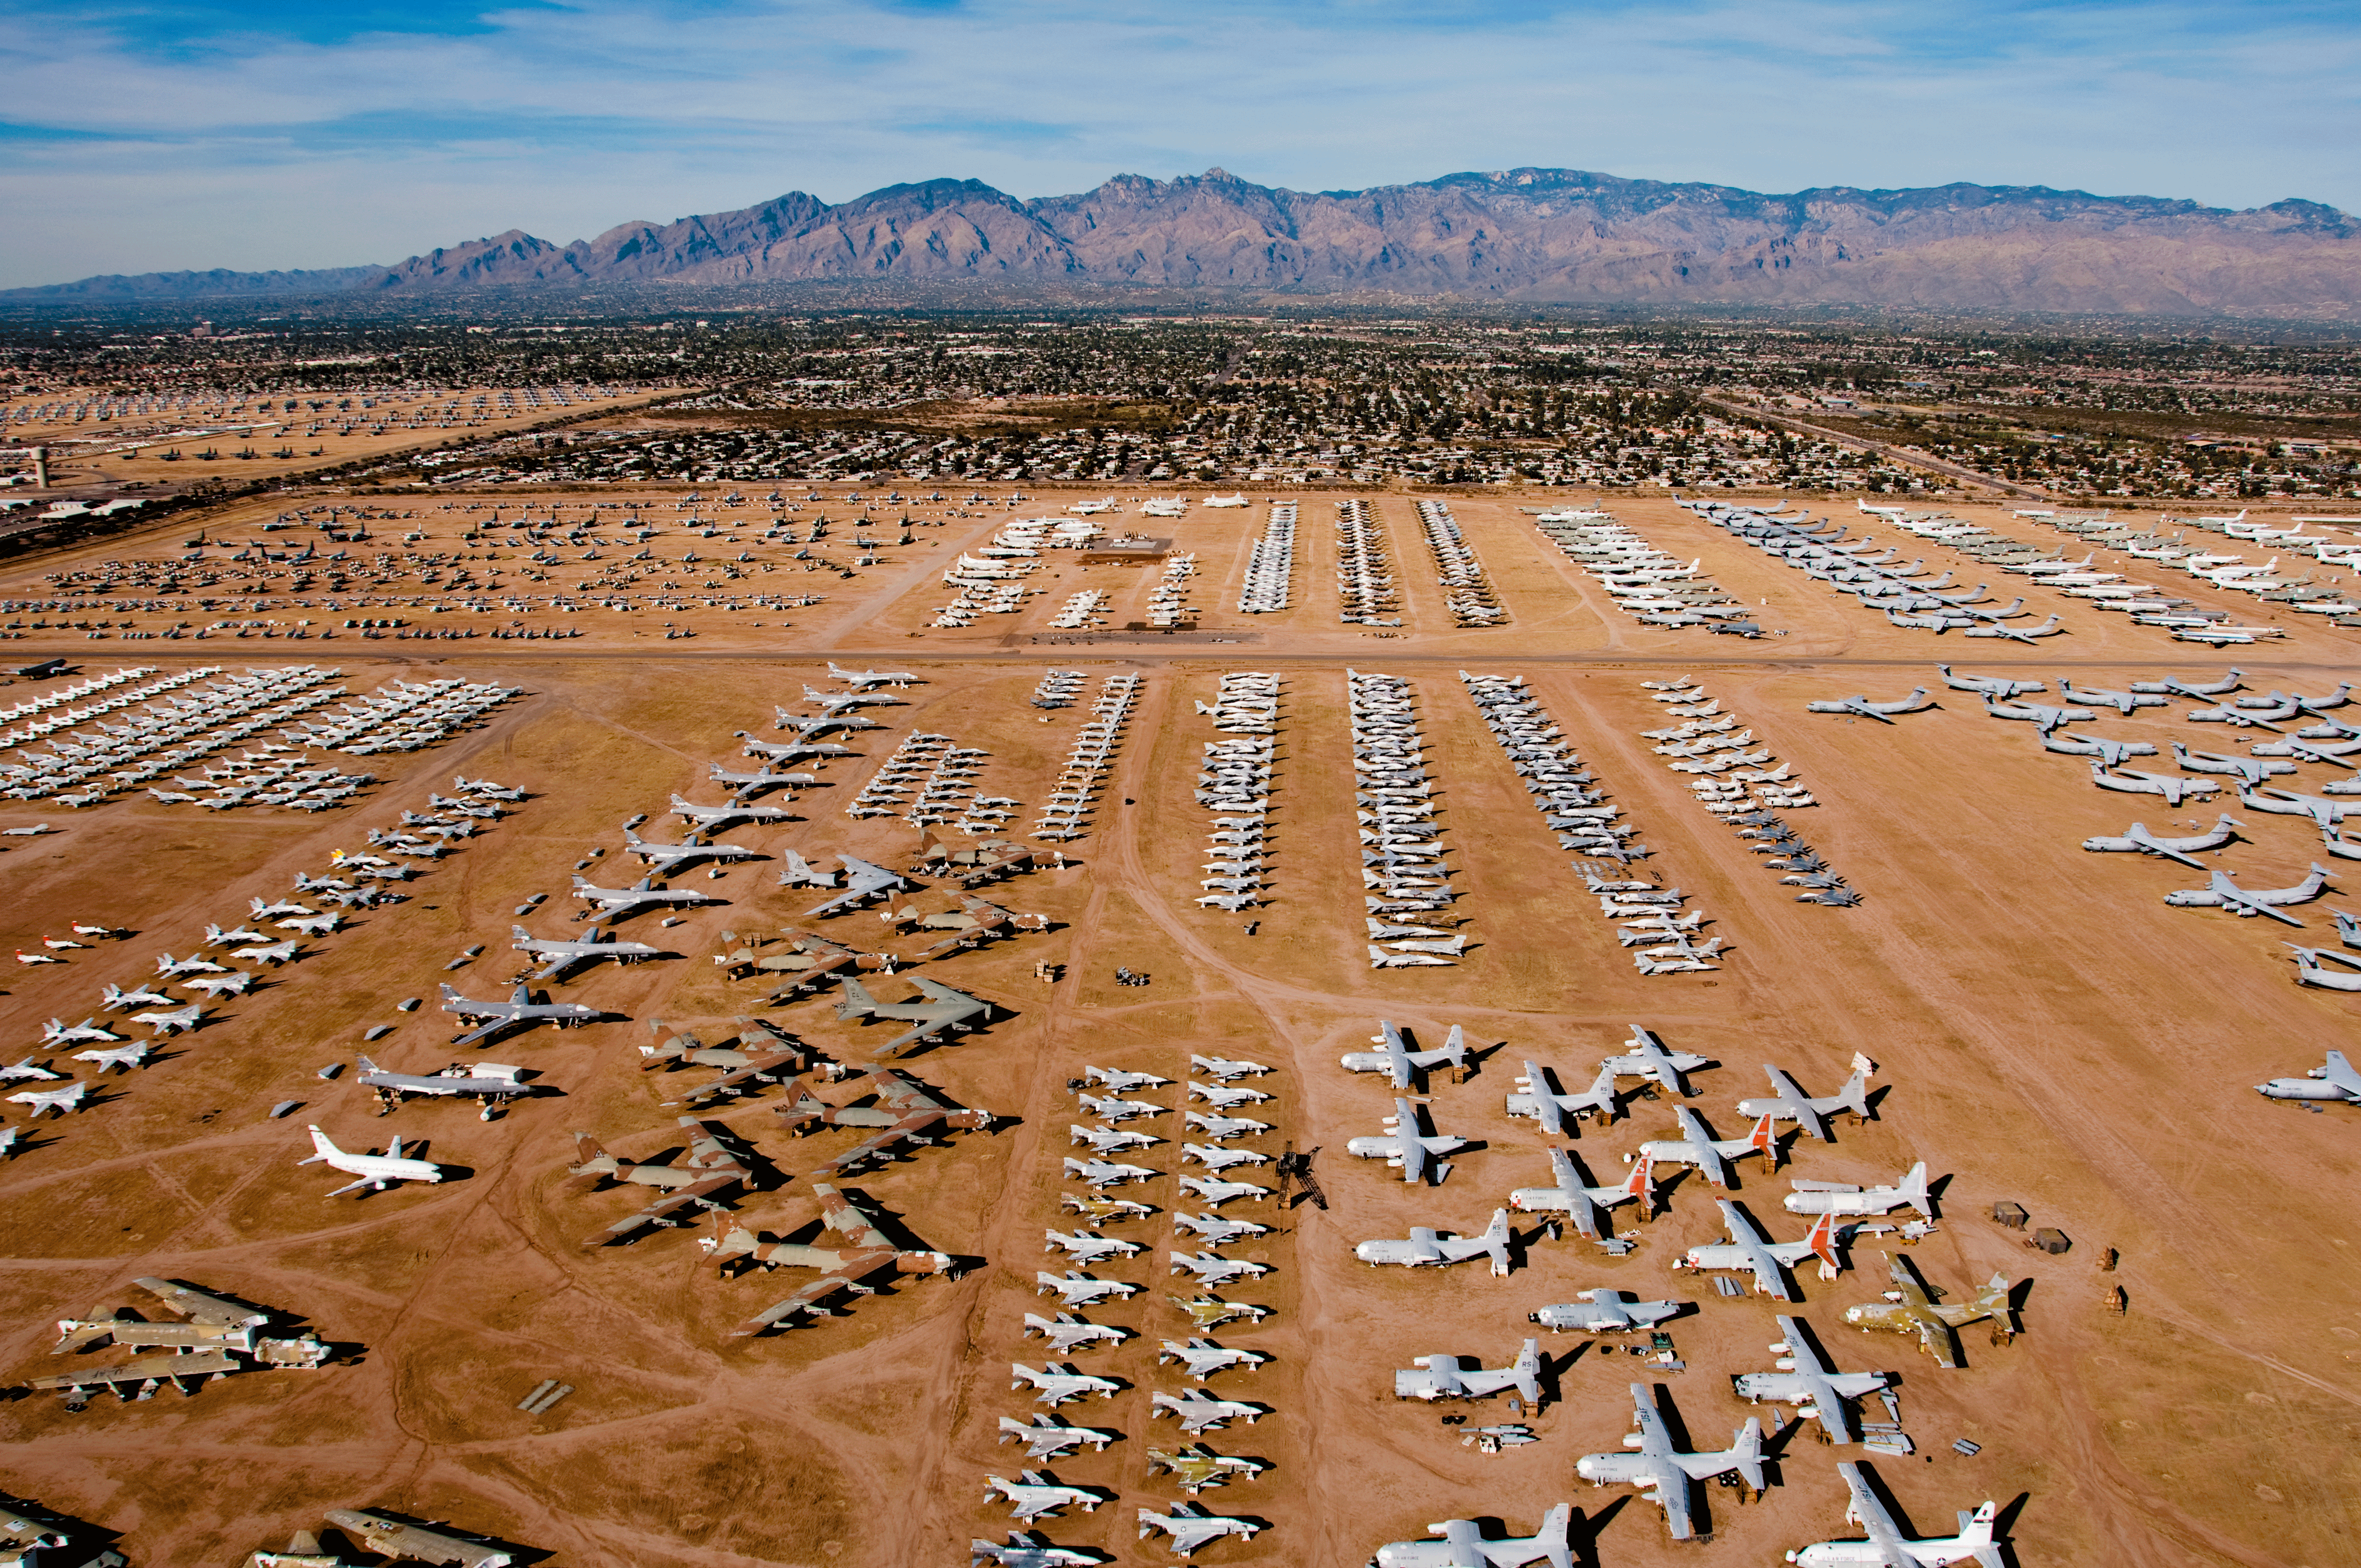 Planes are placed in formation in the desert in front of mountains © Steve Proehl / Getty Images 